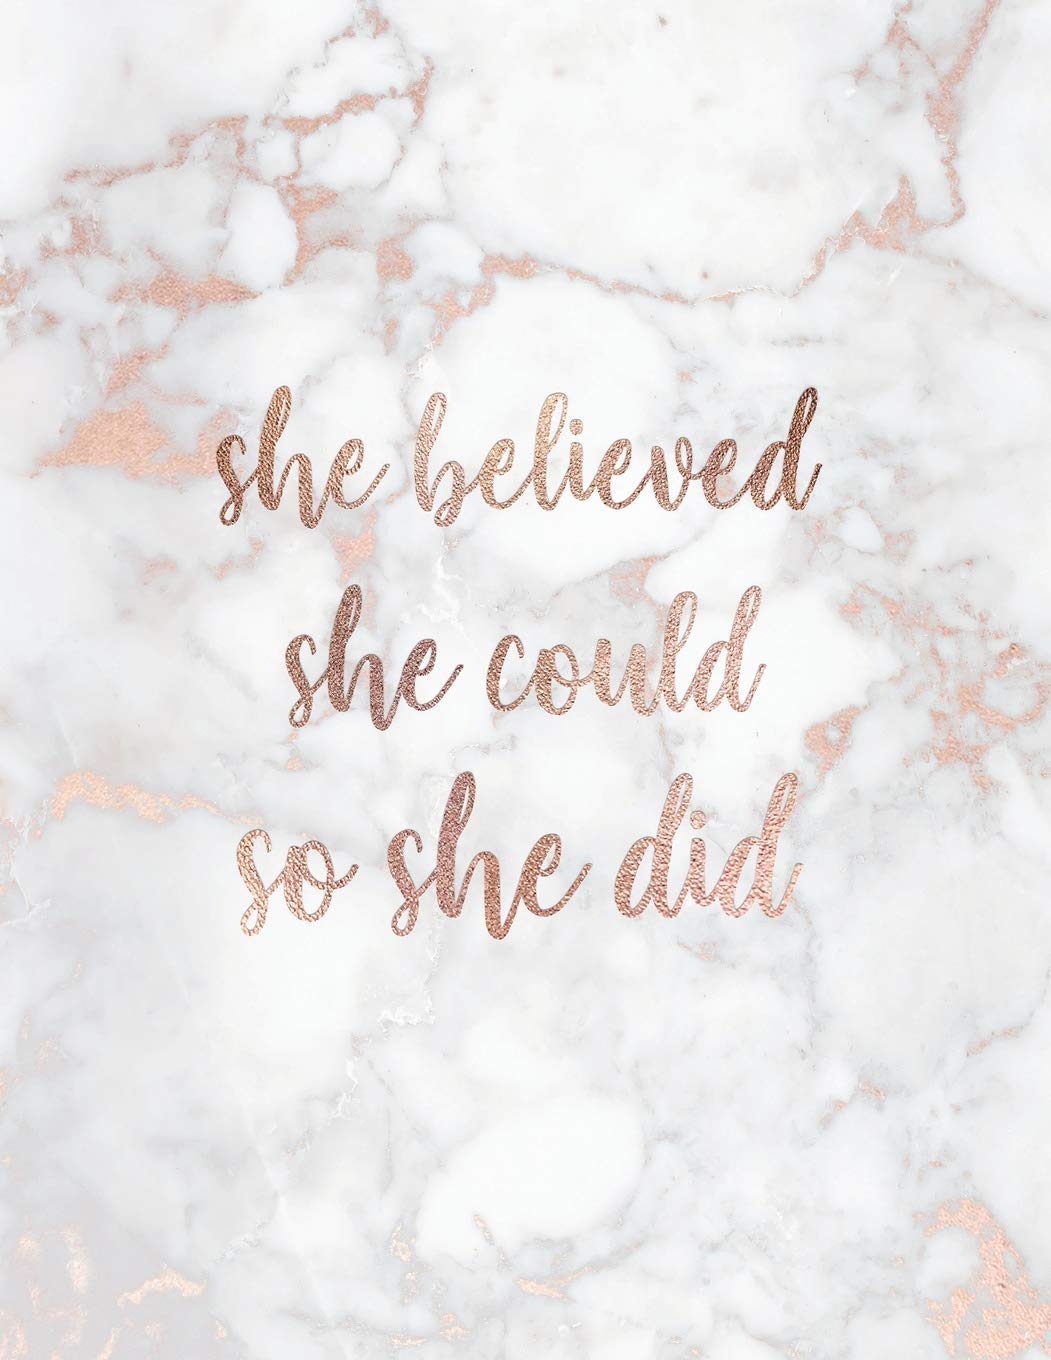 She Believed She Could So She Did: Inspirational Quote Notebook for Women and Girls White Marble with Rose Gold.5 x 11 ., Notebook, Diary, Composition Book): Paperlush Press: 9781724759948: Books